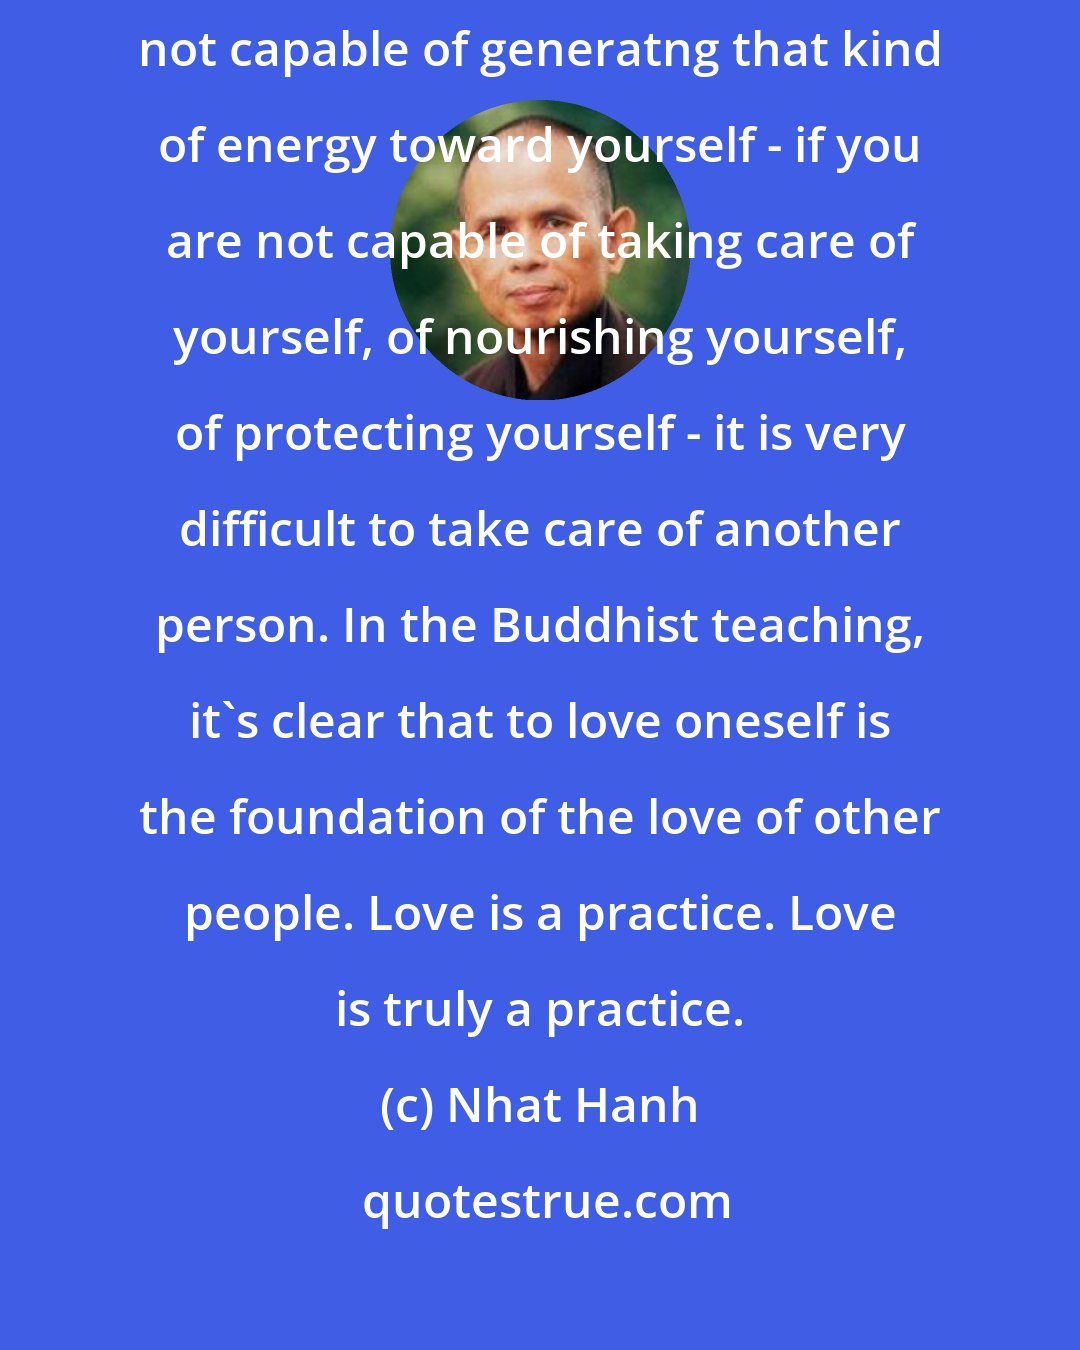 Nhat Hanh: Love is the capacity to take care, to protect, to nourish. If you are not capable of generatng that kind of energy toward yourself - if you are not capable of taking care of yourself, of nourishing yourself, of protecting yourself - it is very difficult to take care of another person. In the Buddhist teaching, it's clear that to love oneself is the foundation of the love of other people. Love is a practice. Love is truly a practice.